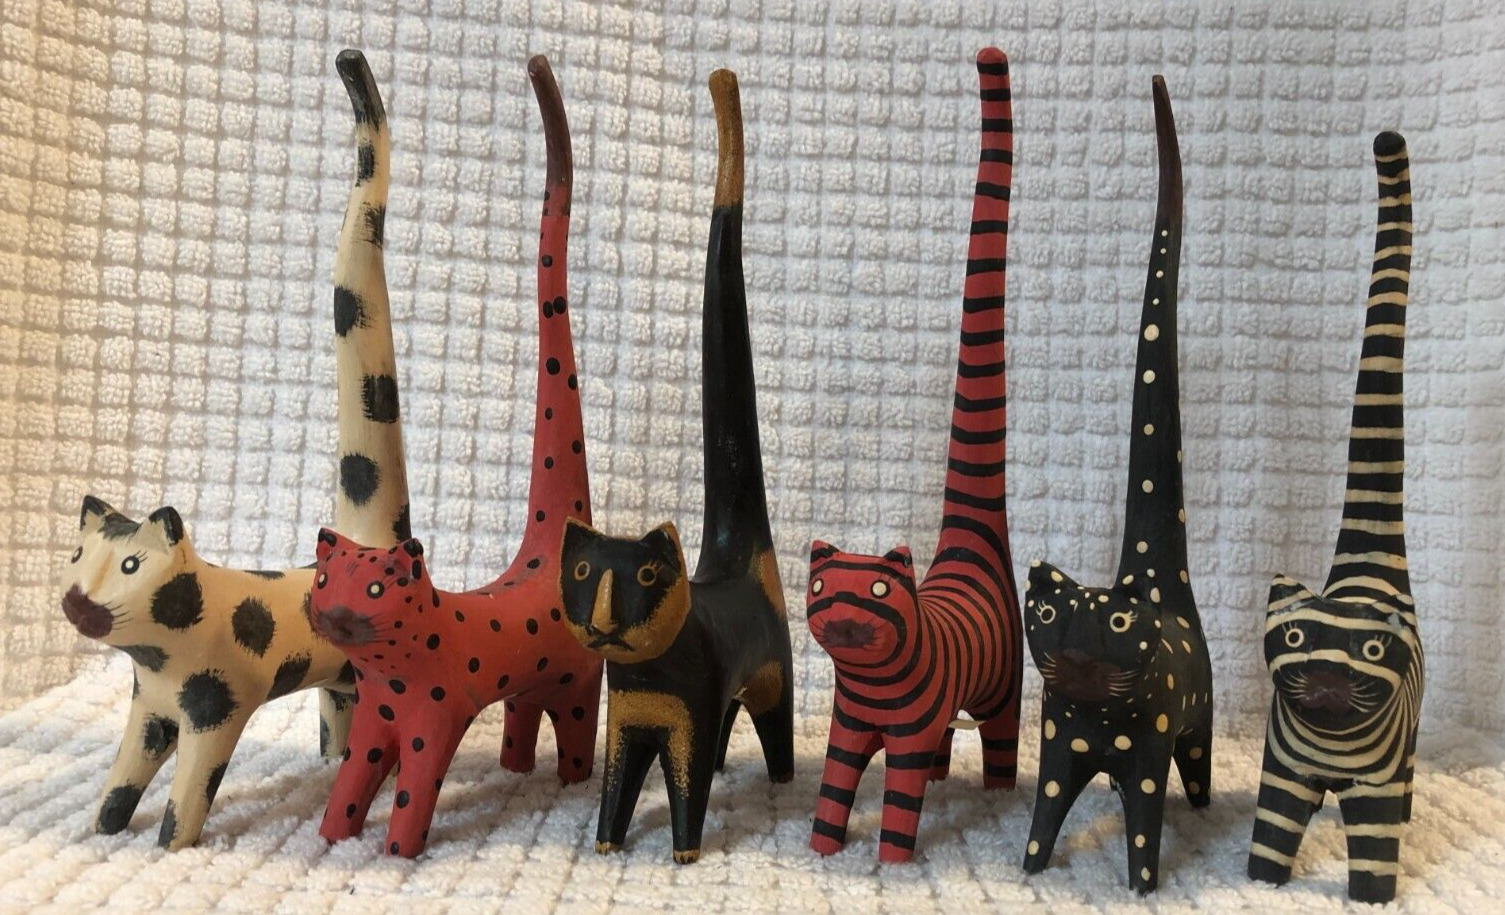 LONG TAIL WOODEN CATS KITTENS LOT OF 6 HAND PAINTED FOLK ART 7 \